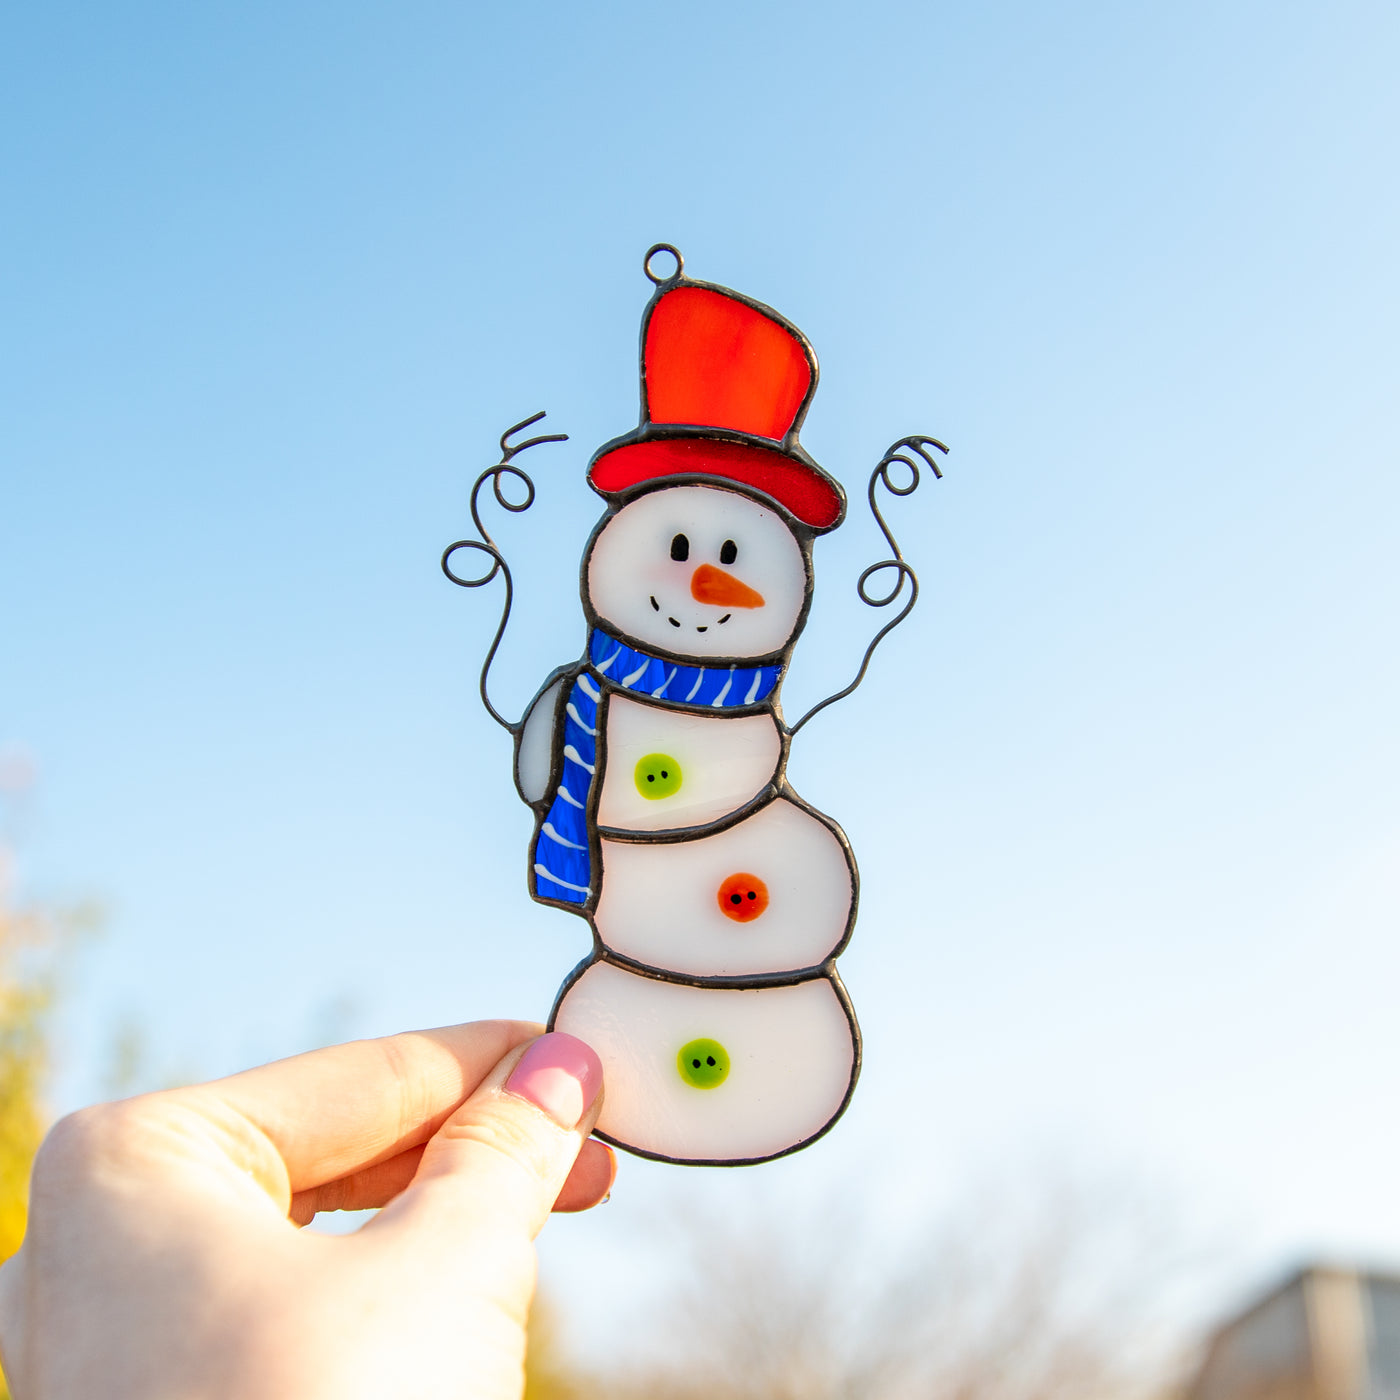 Funny snowman suncatcher of stained glass